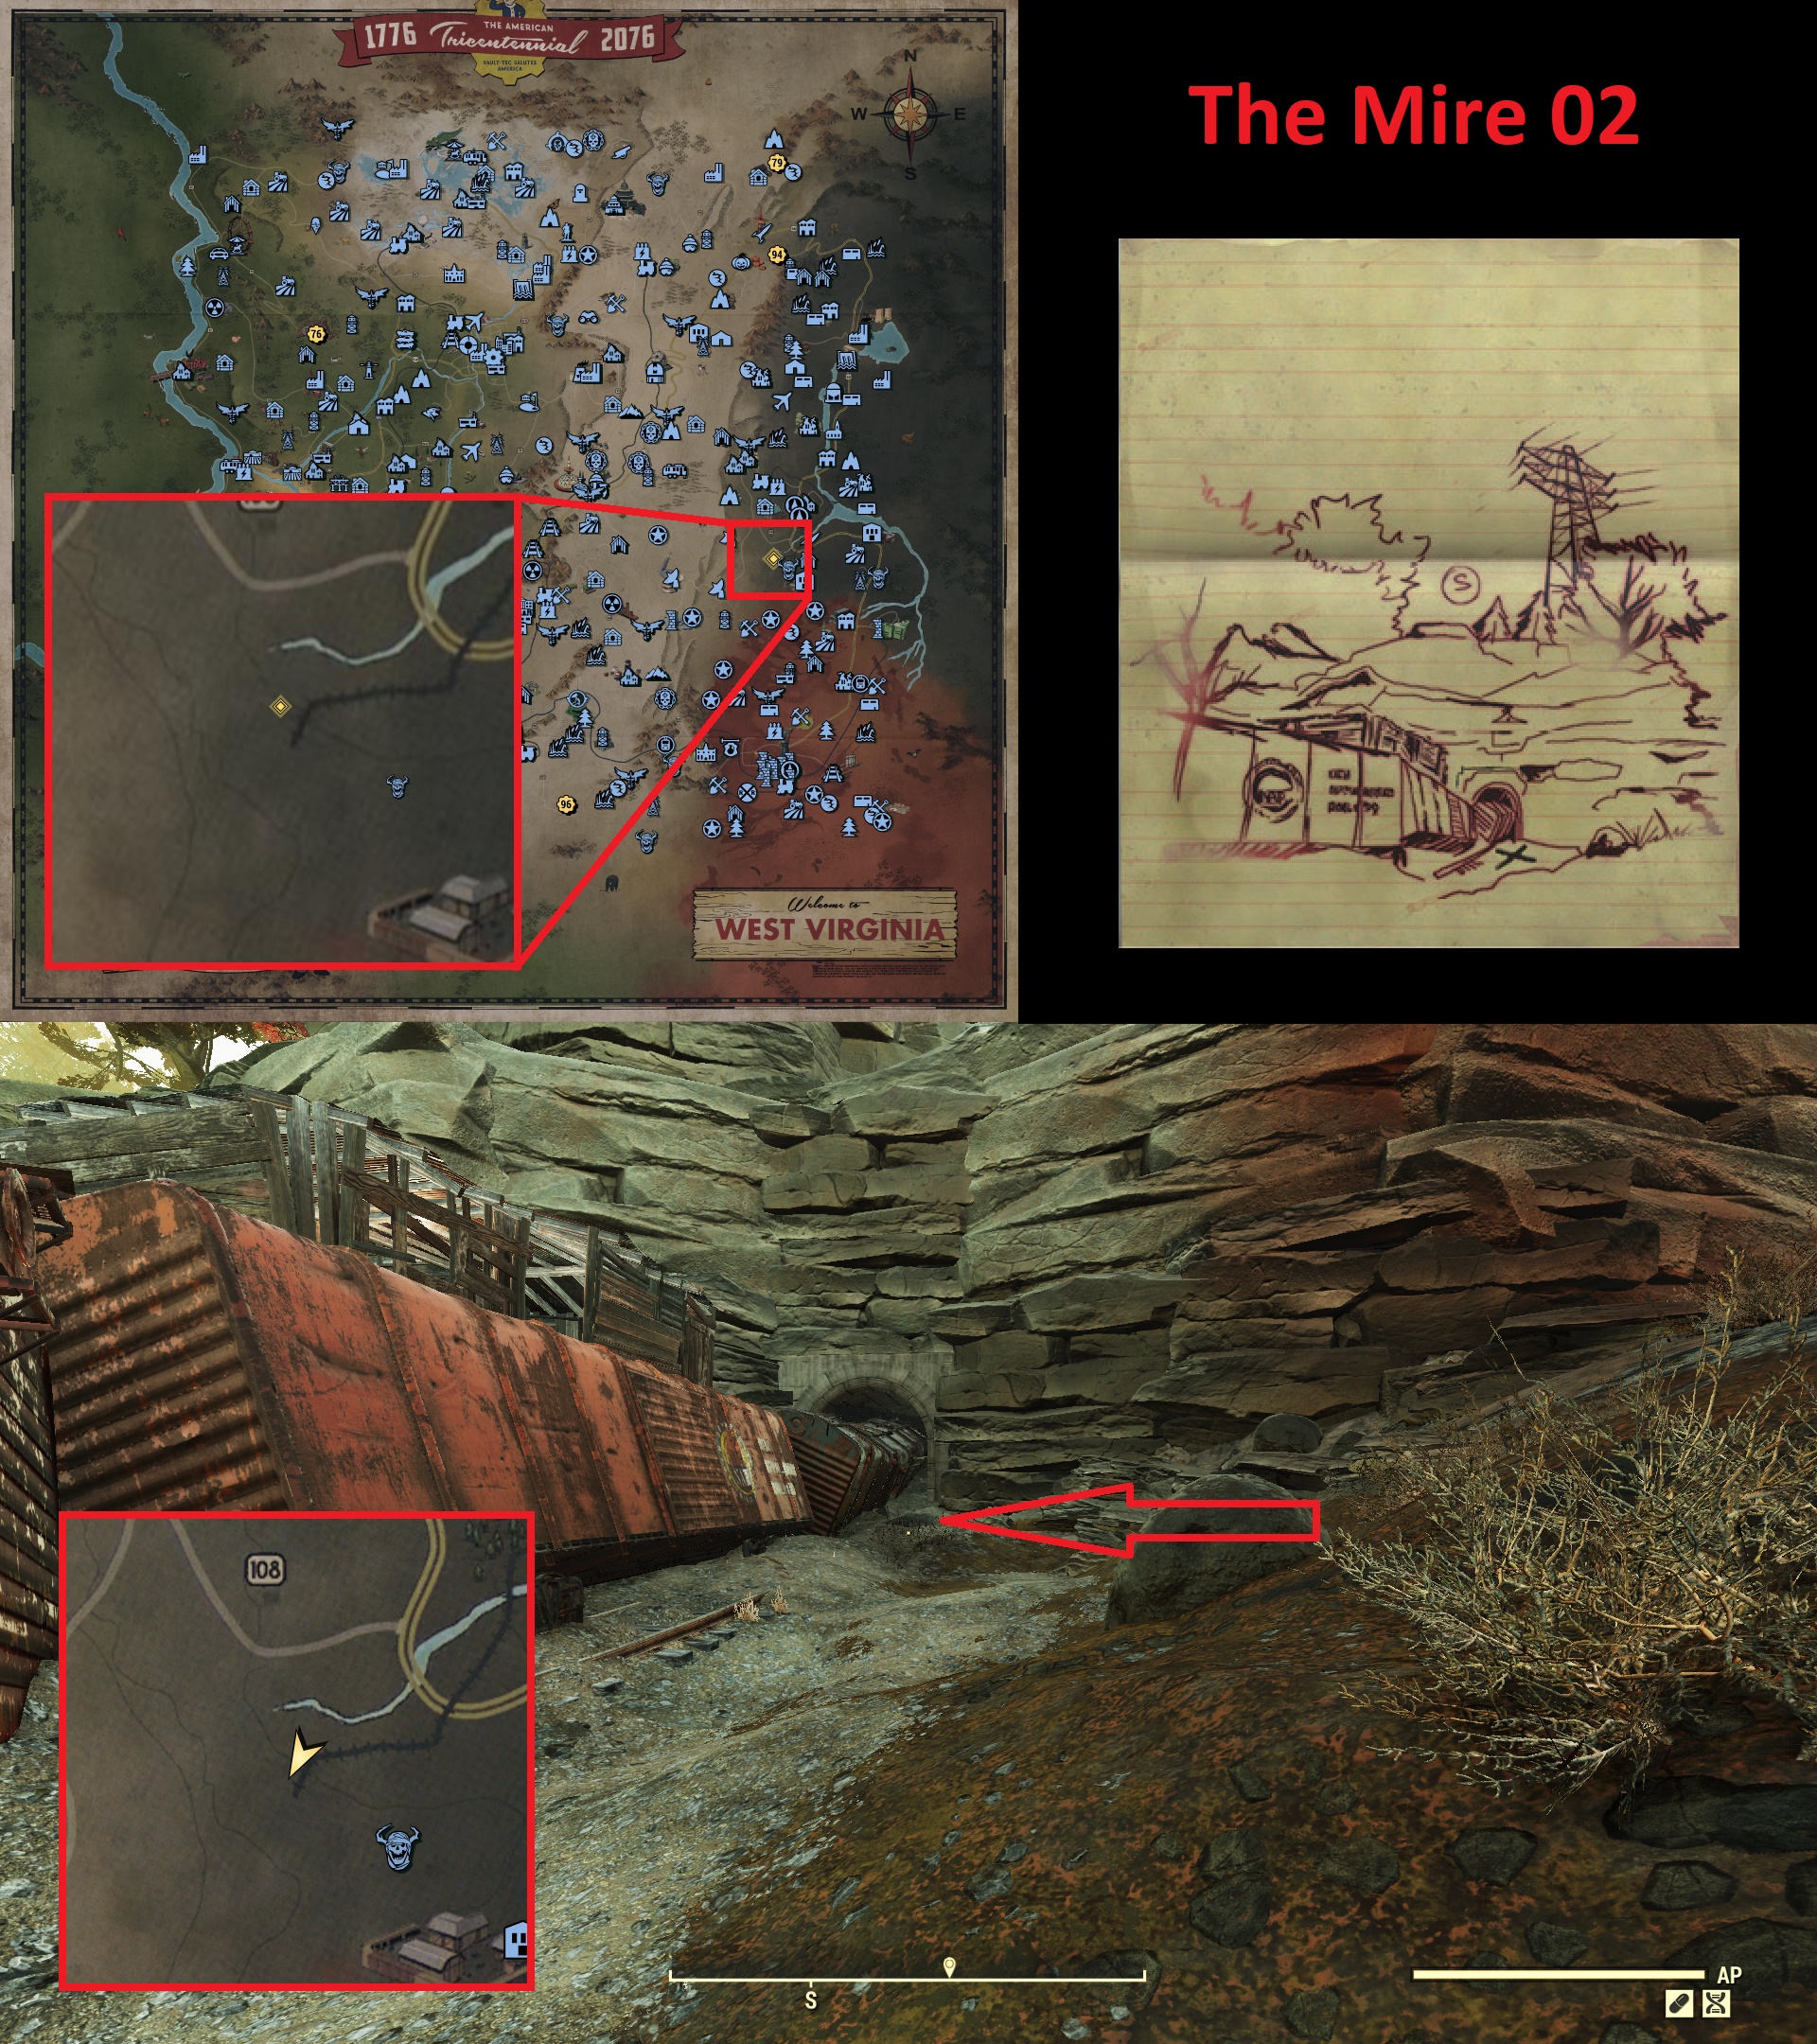 Fallout 76 Treasure Map Locations - The Mire 02 - 706BE97